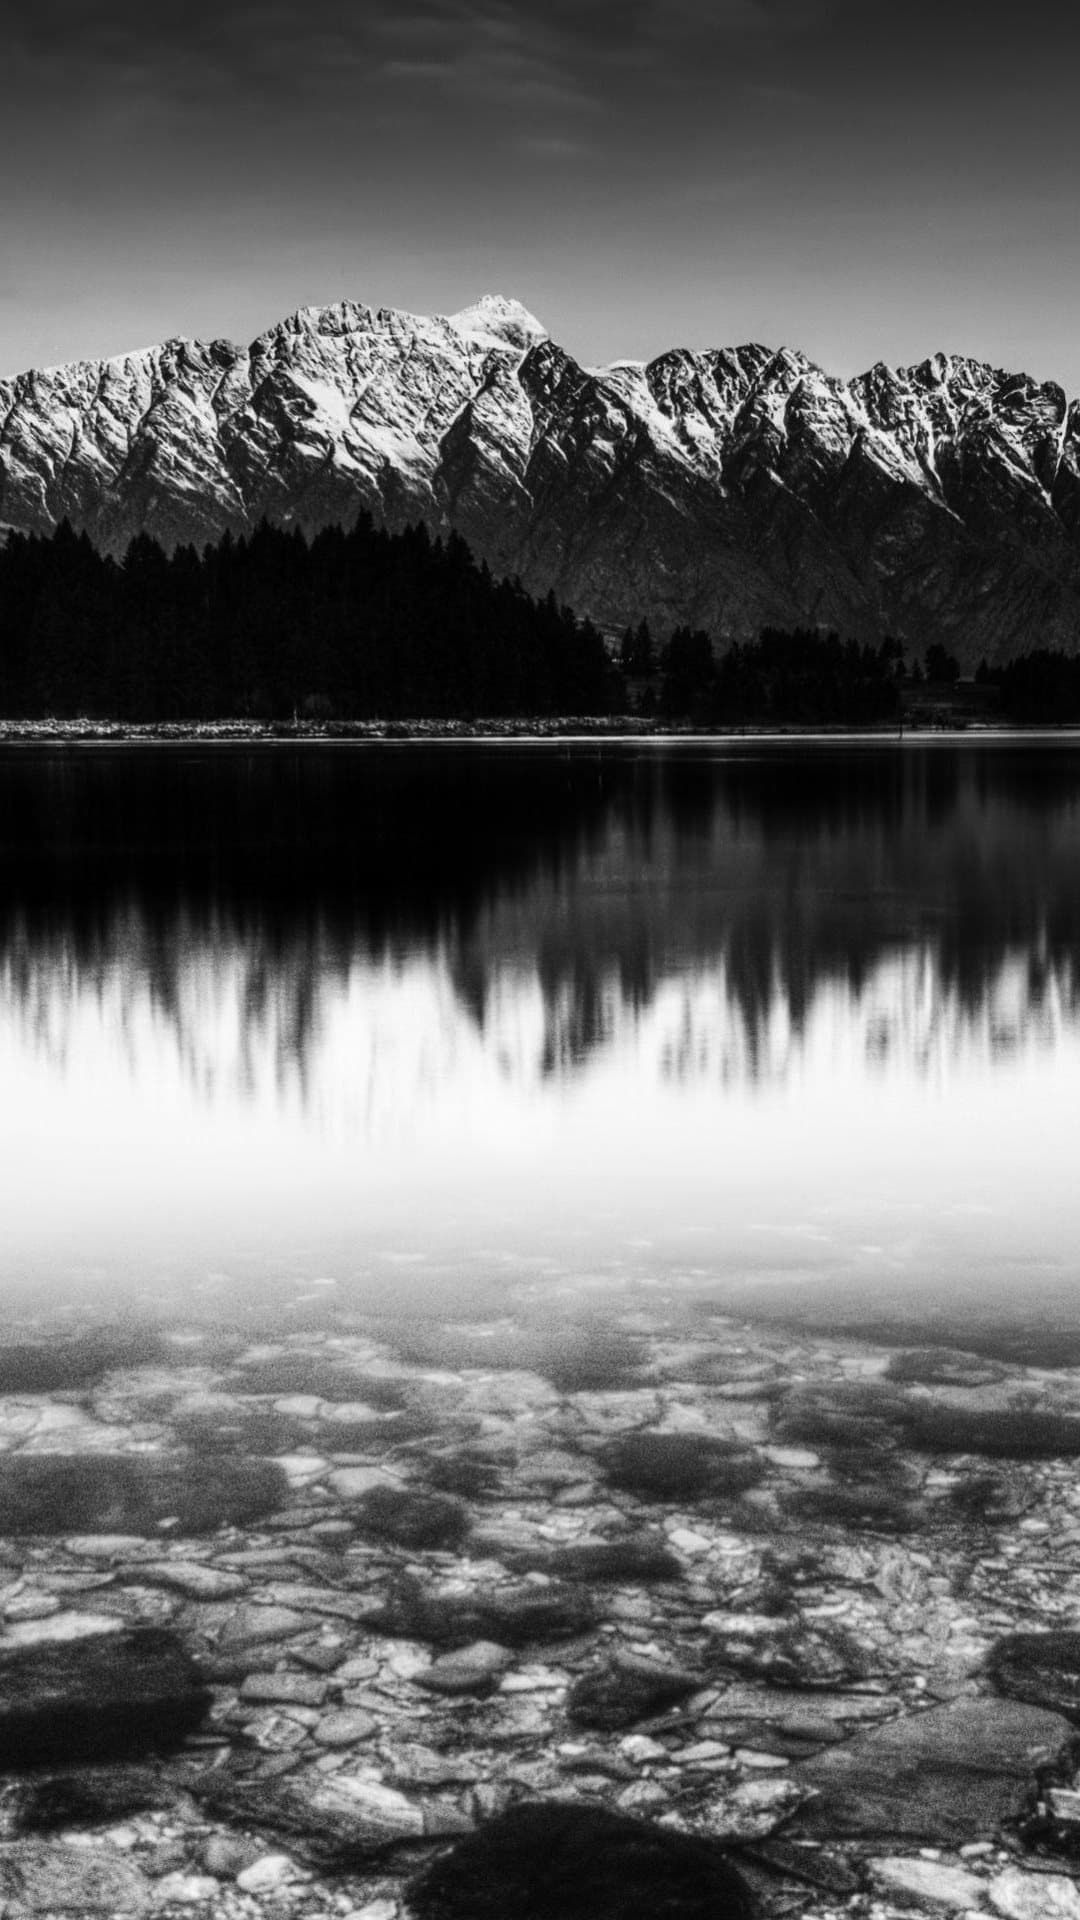 Black and White Nature iPhone Wallpaper Free Black and White Nature iPhone Background